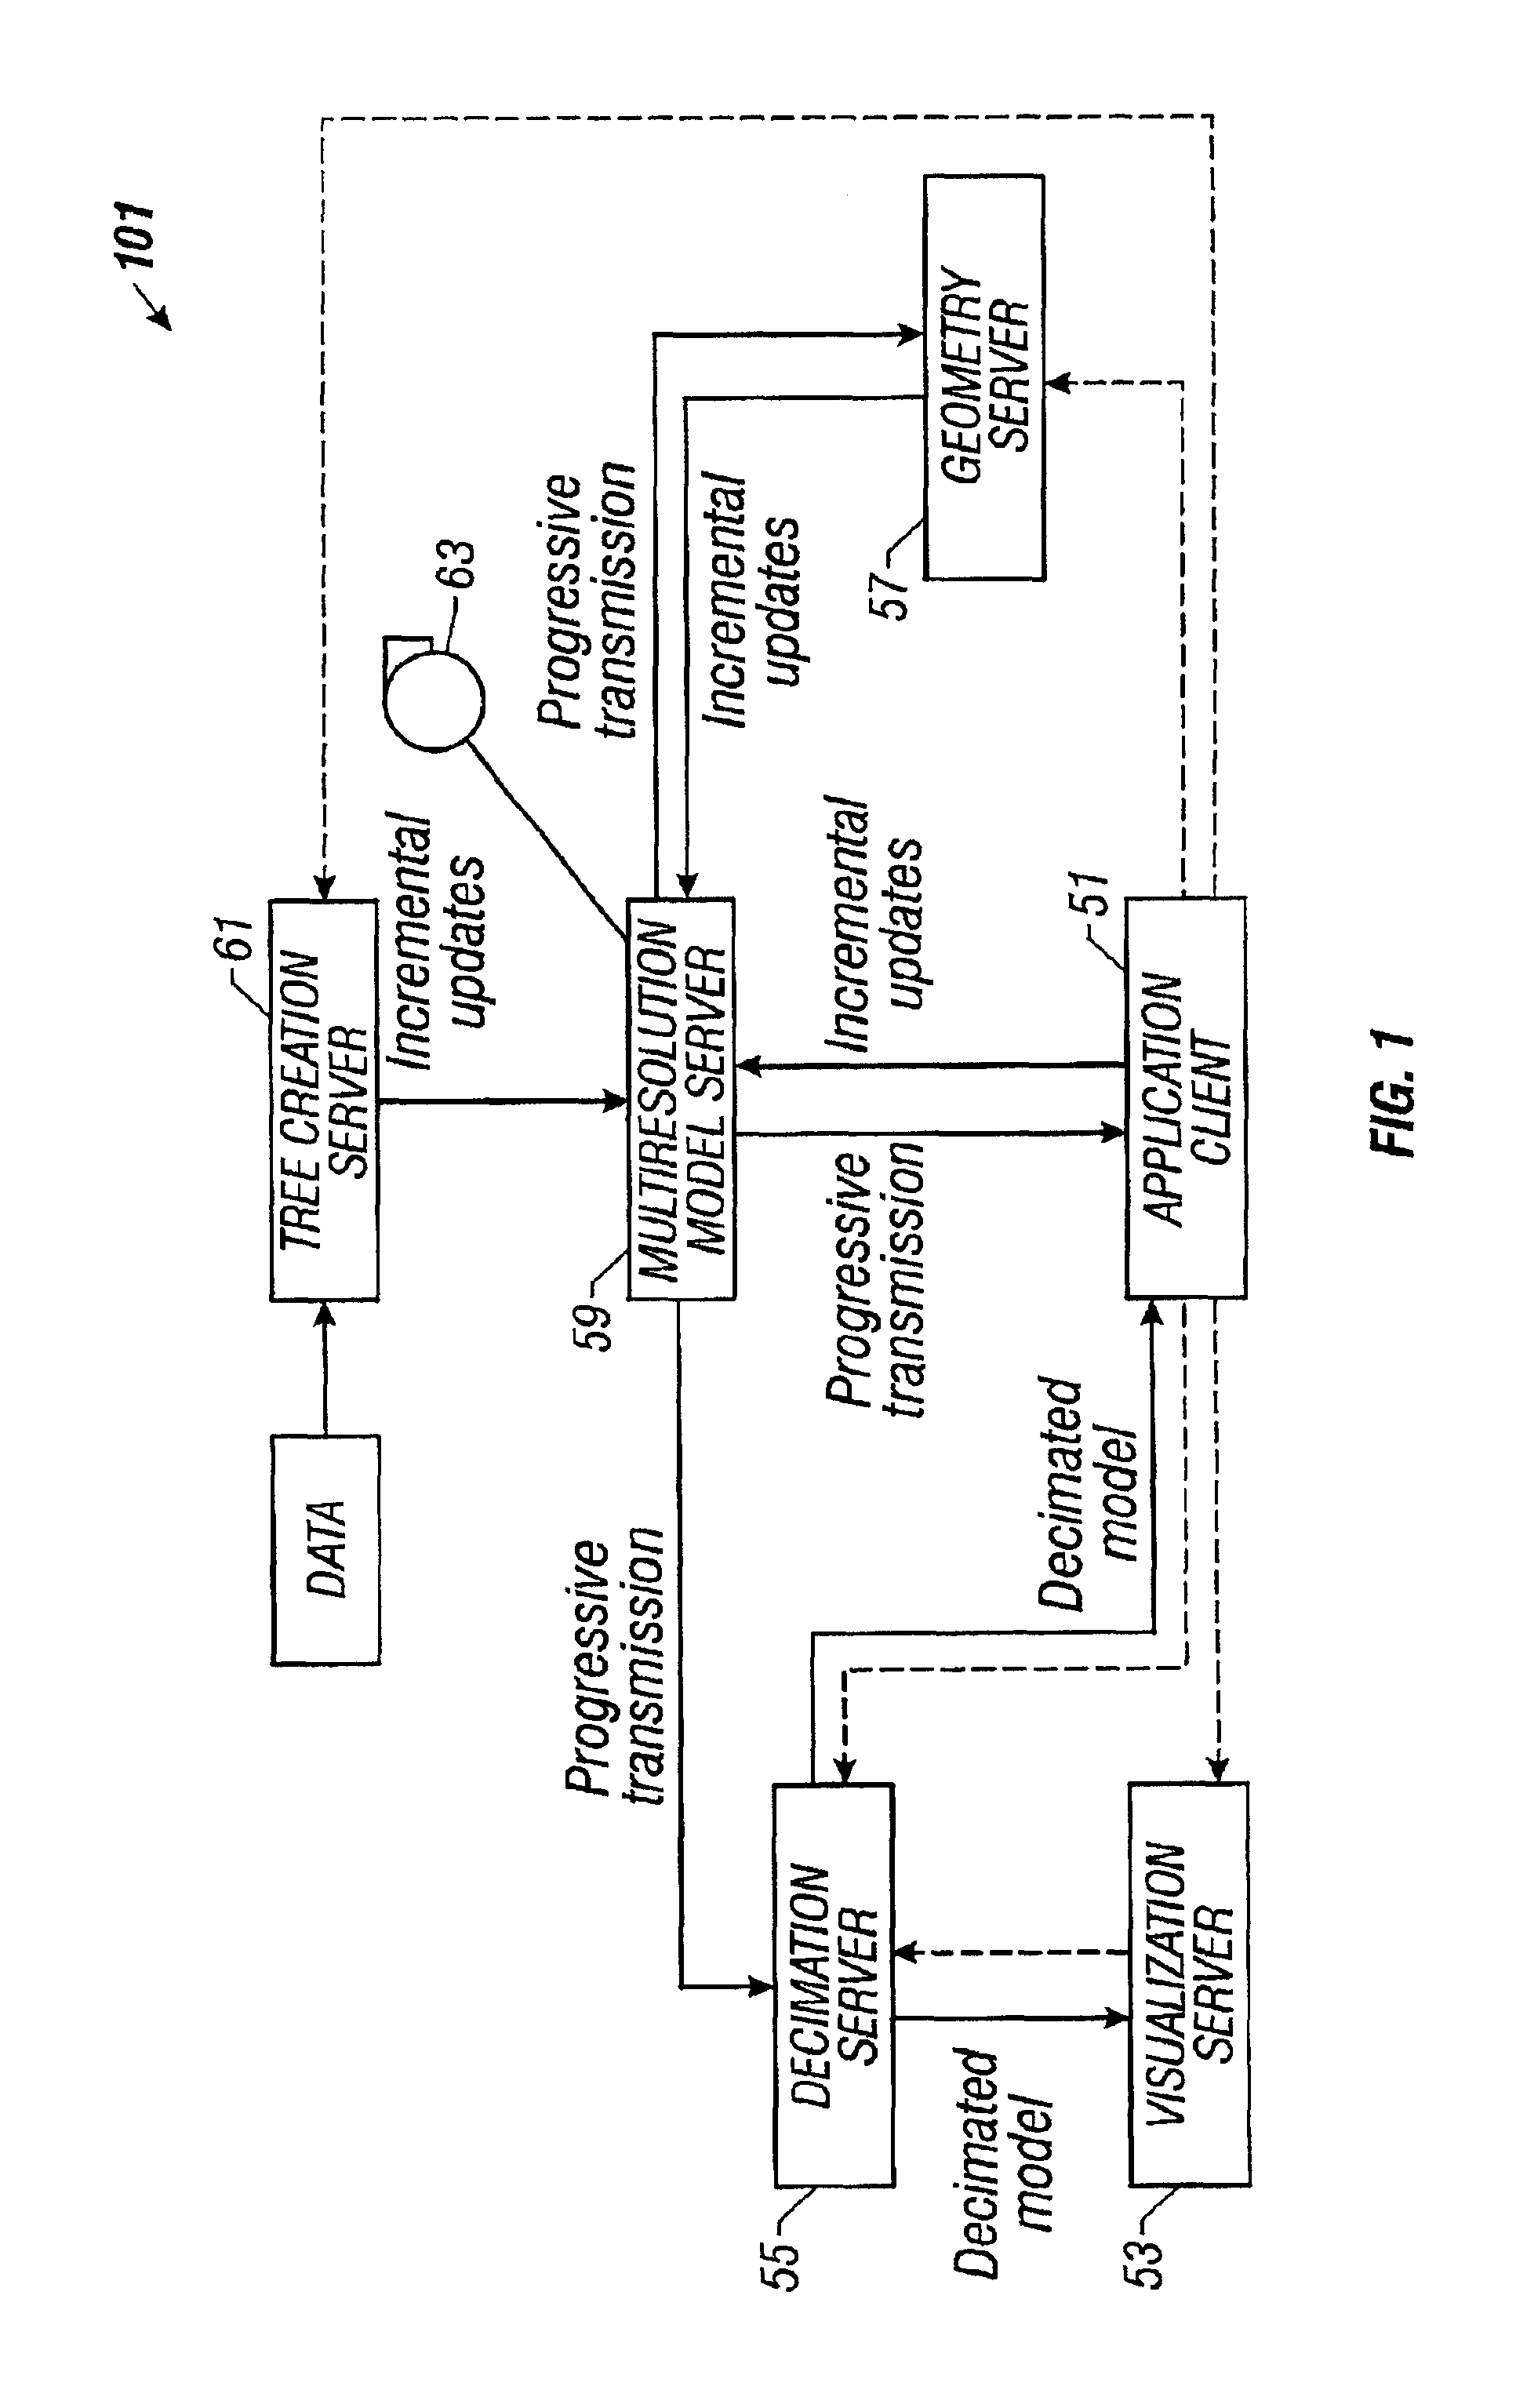 Distributed multiresolution geometry modeling system and method